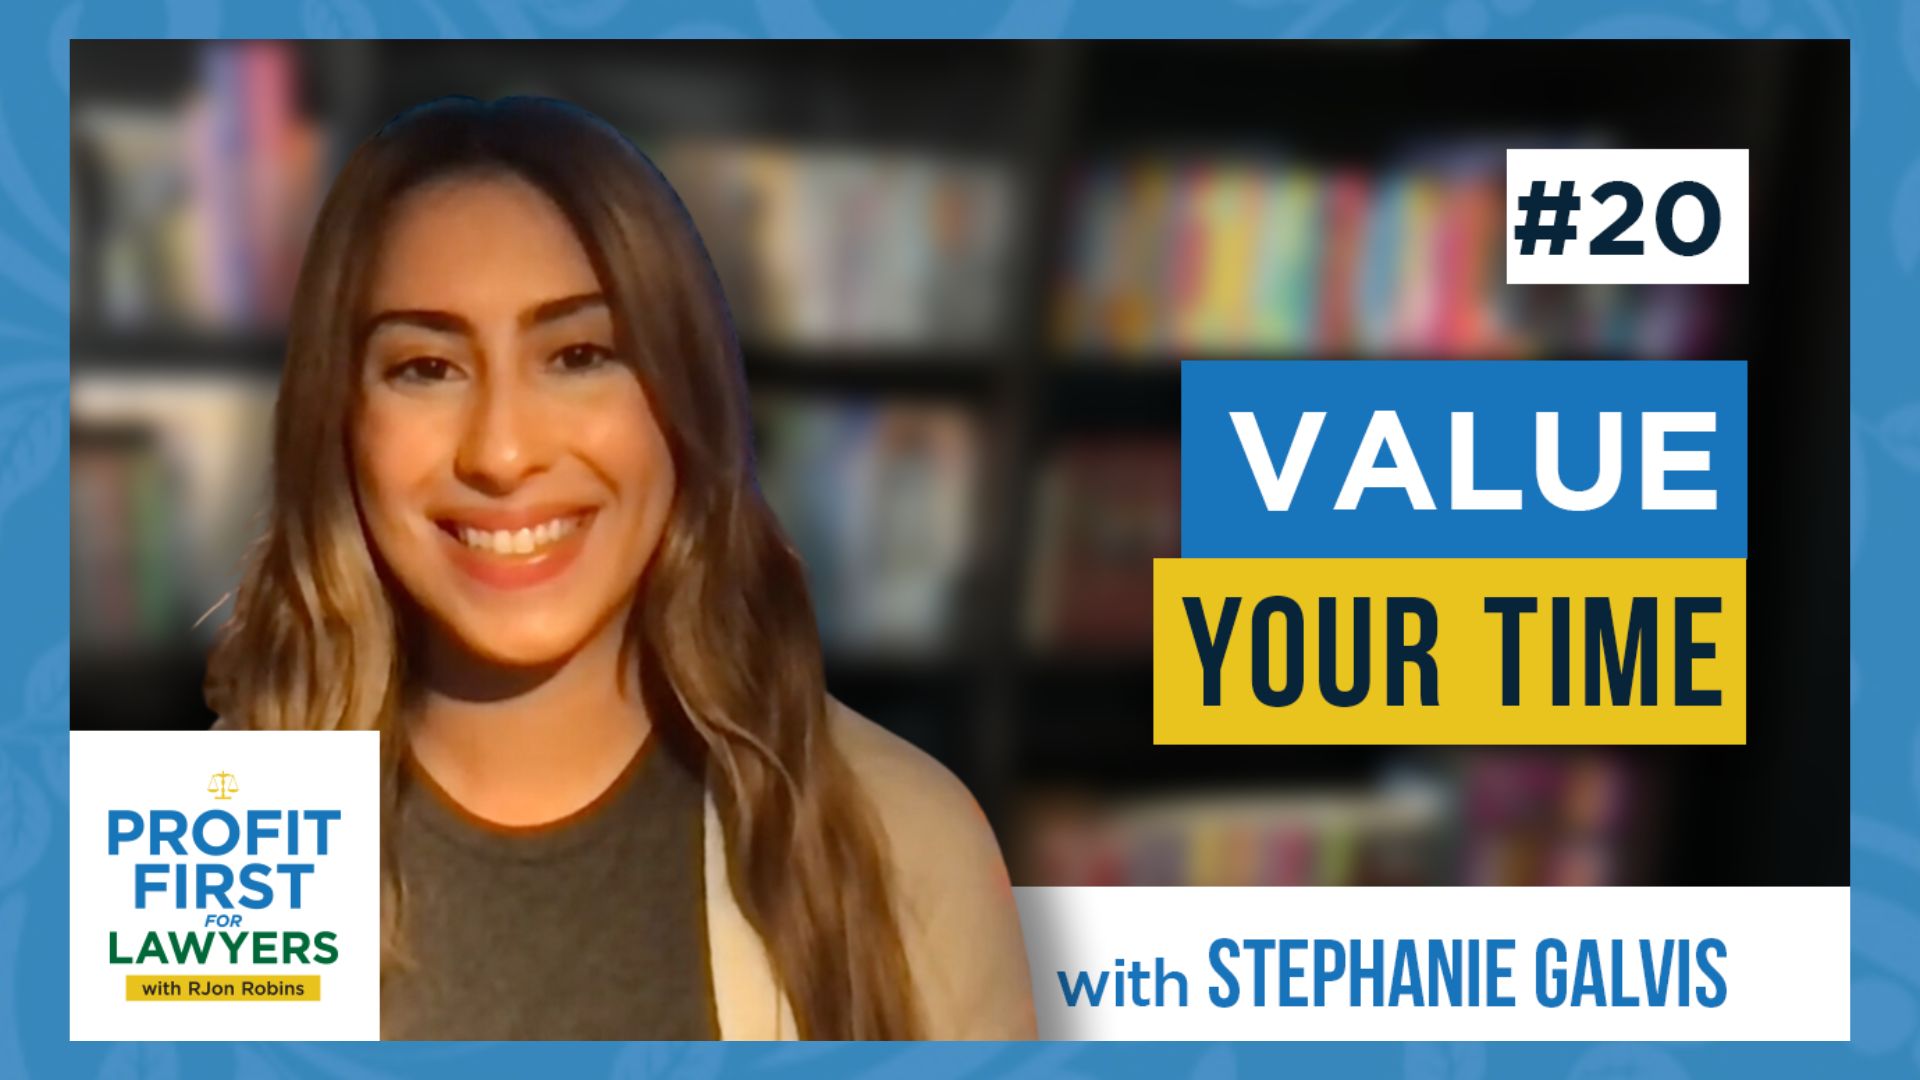 featured image of Stephanie Galvis on episode 20 of the Profit First For Lawyers podcast. Topic is Value Your Time.